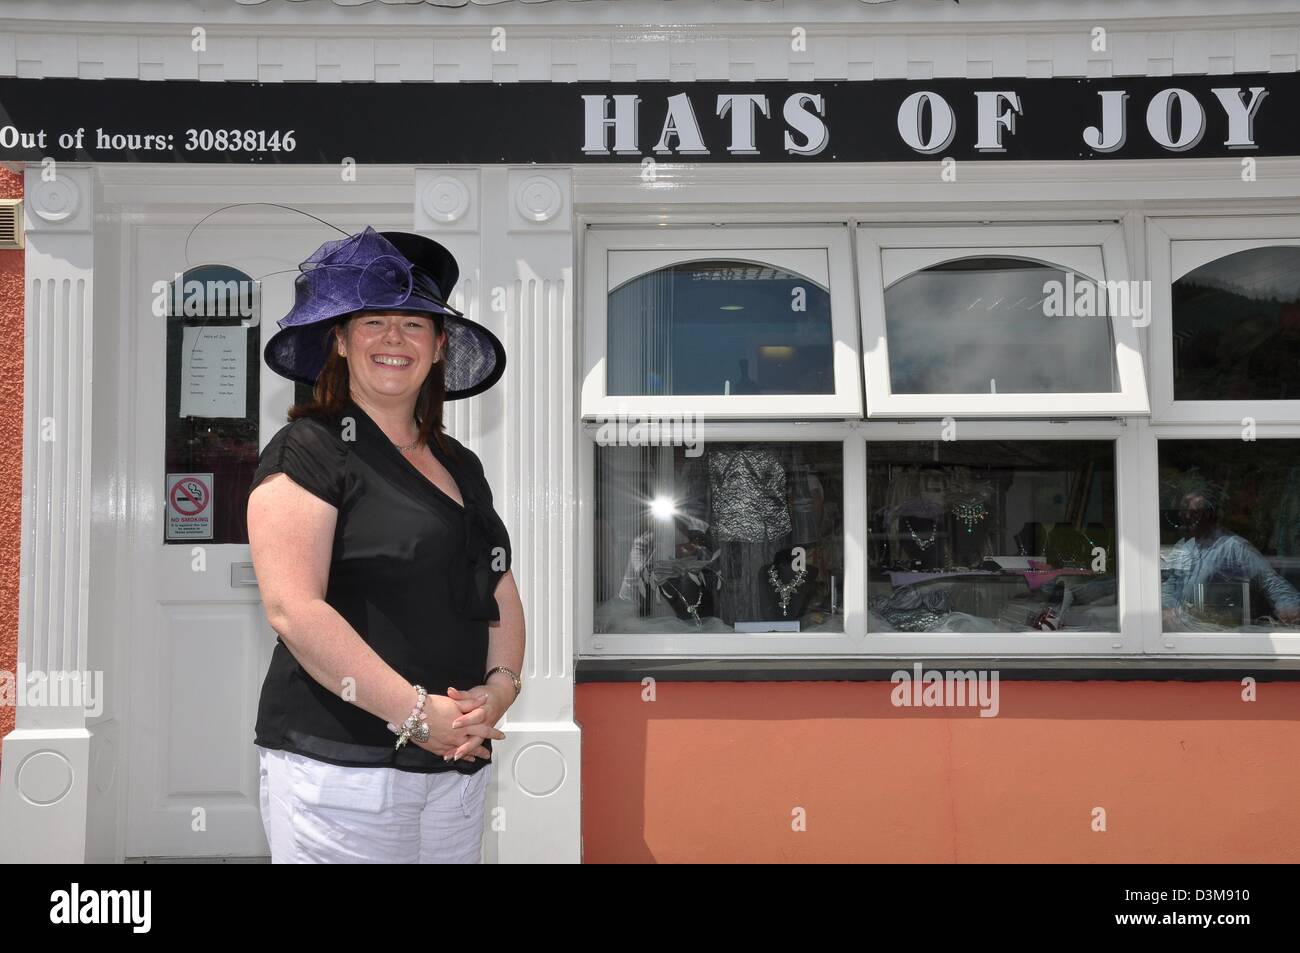 Michelle Gildernew Sinn Fein MP for Fermanagh South Tyrone wearing a large hat. CREDIT: LiamMcArdle.com Stock Photo